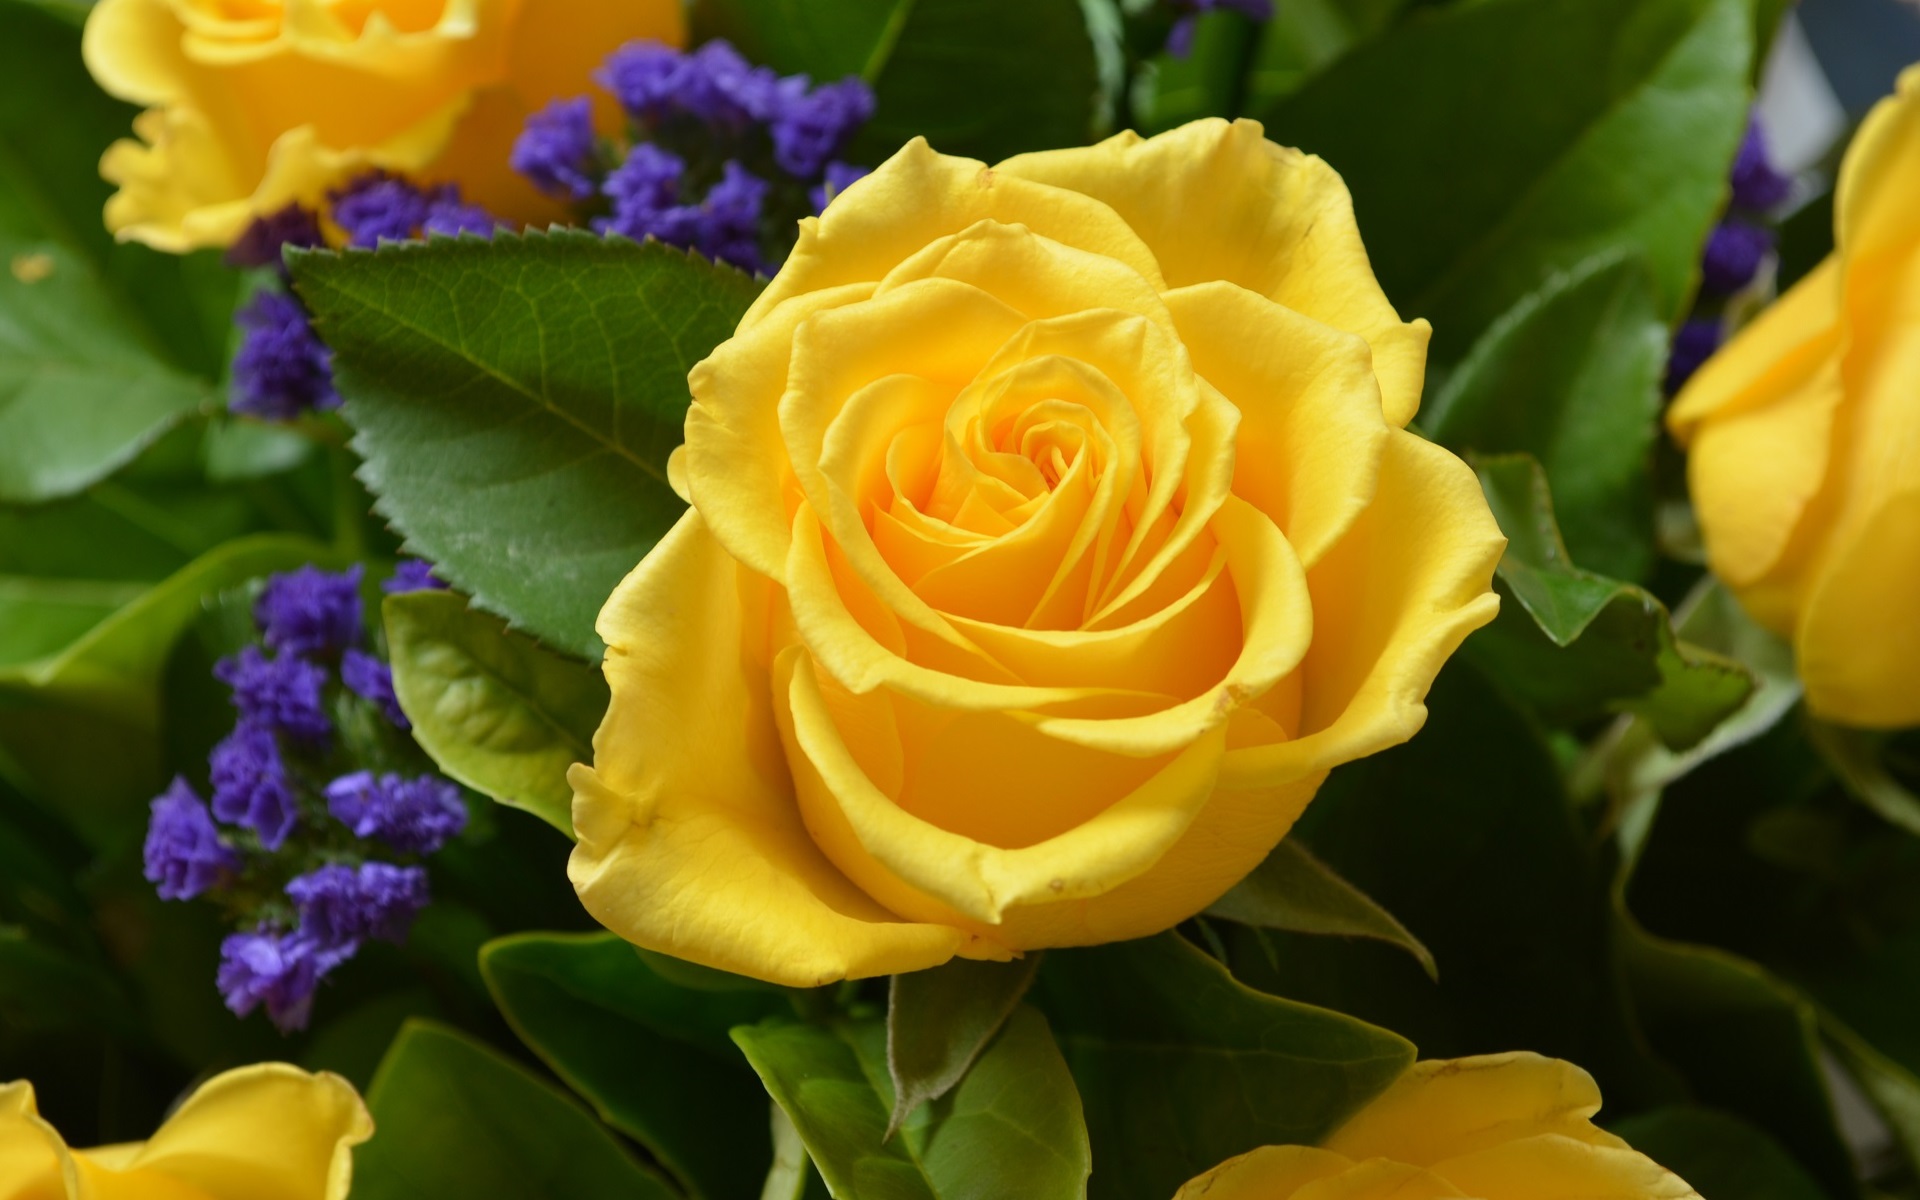 Close-Up of a Yellow Rose in a Bouquet by lonewolf6738